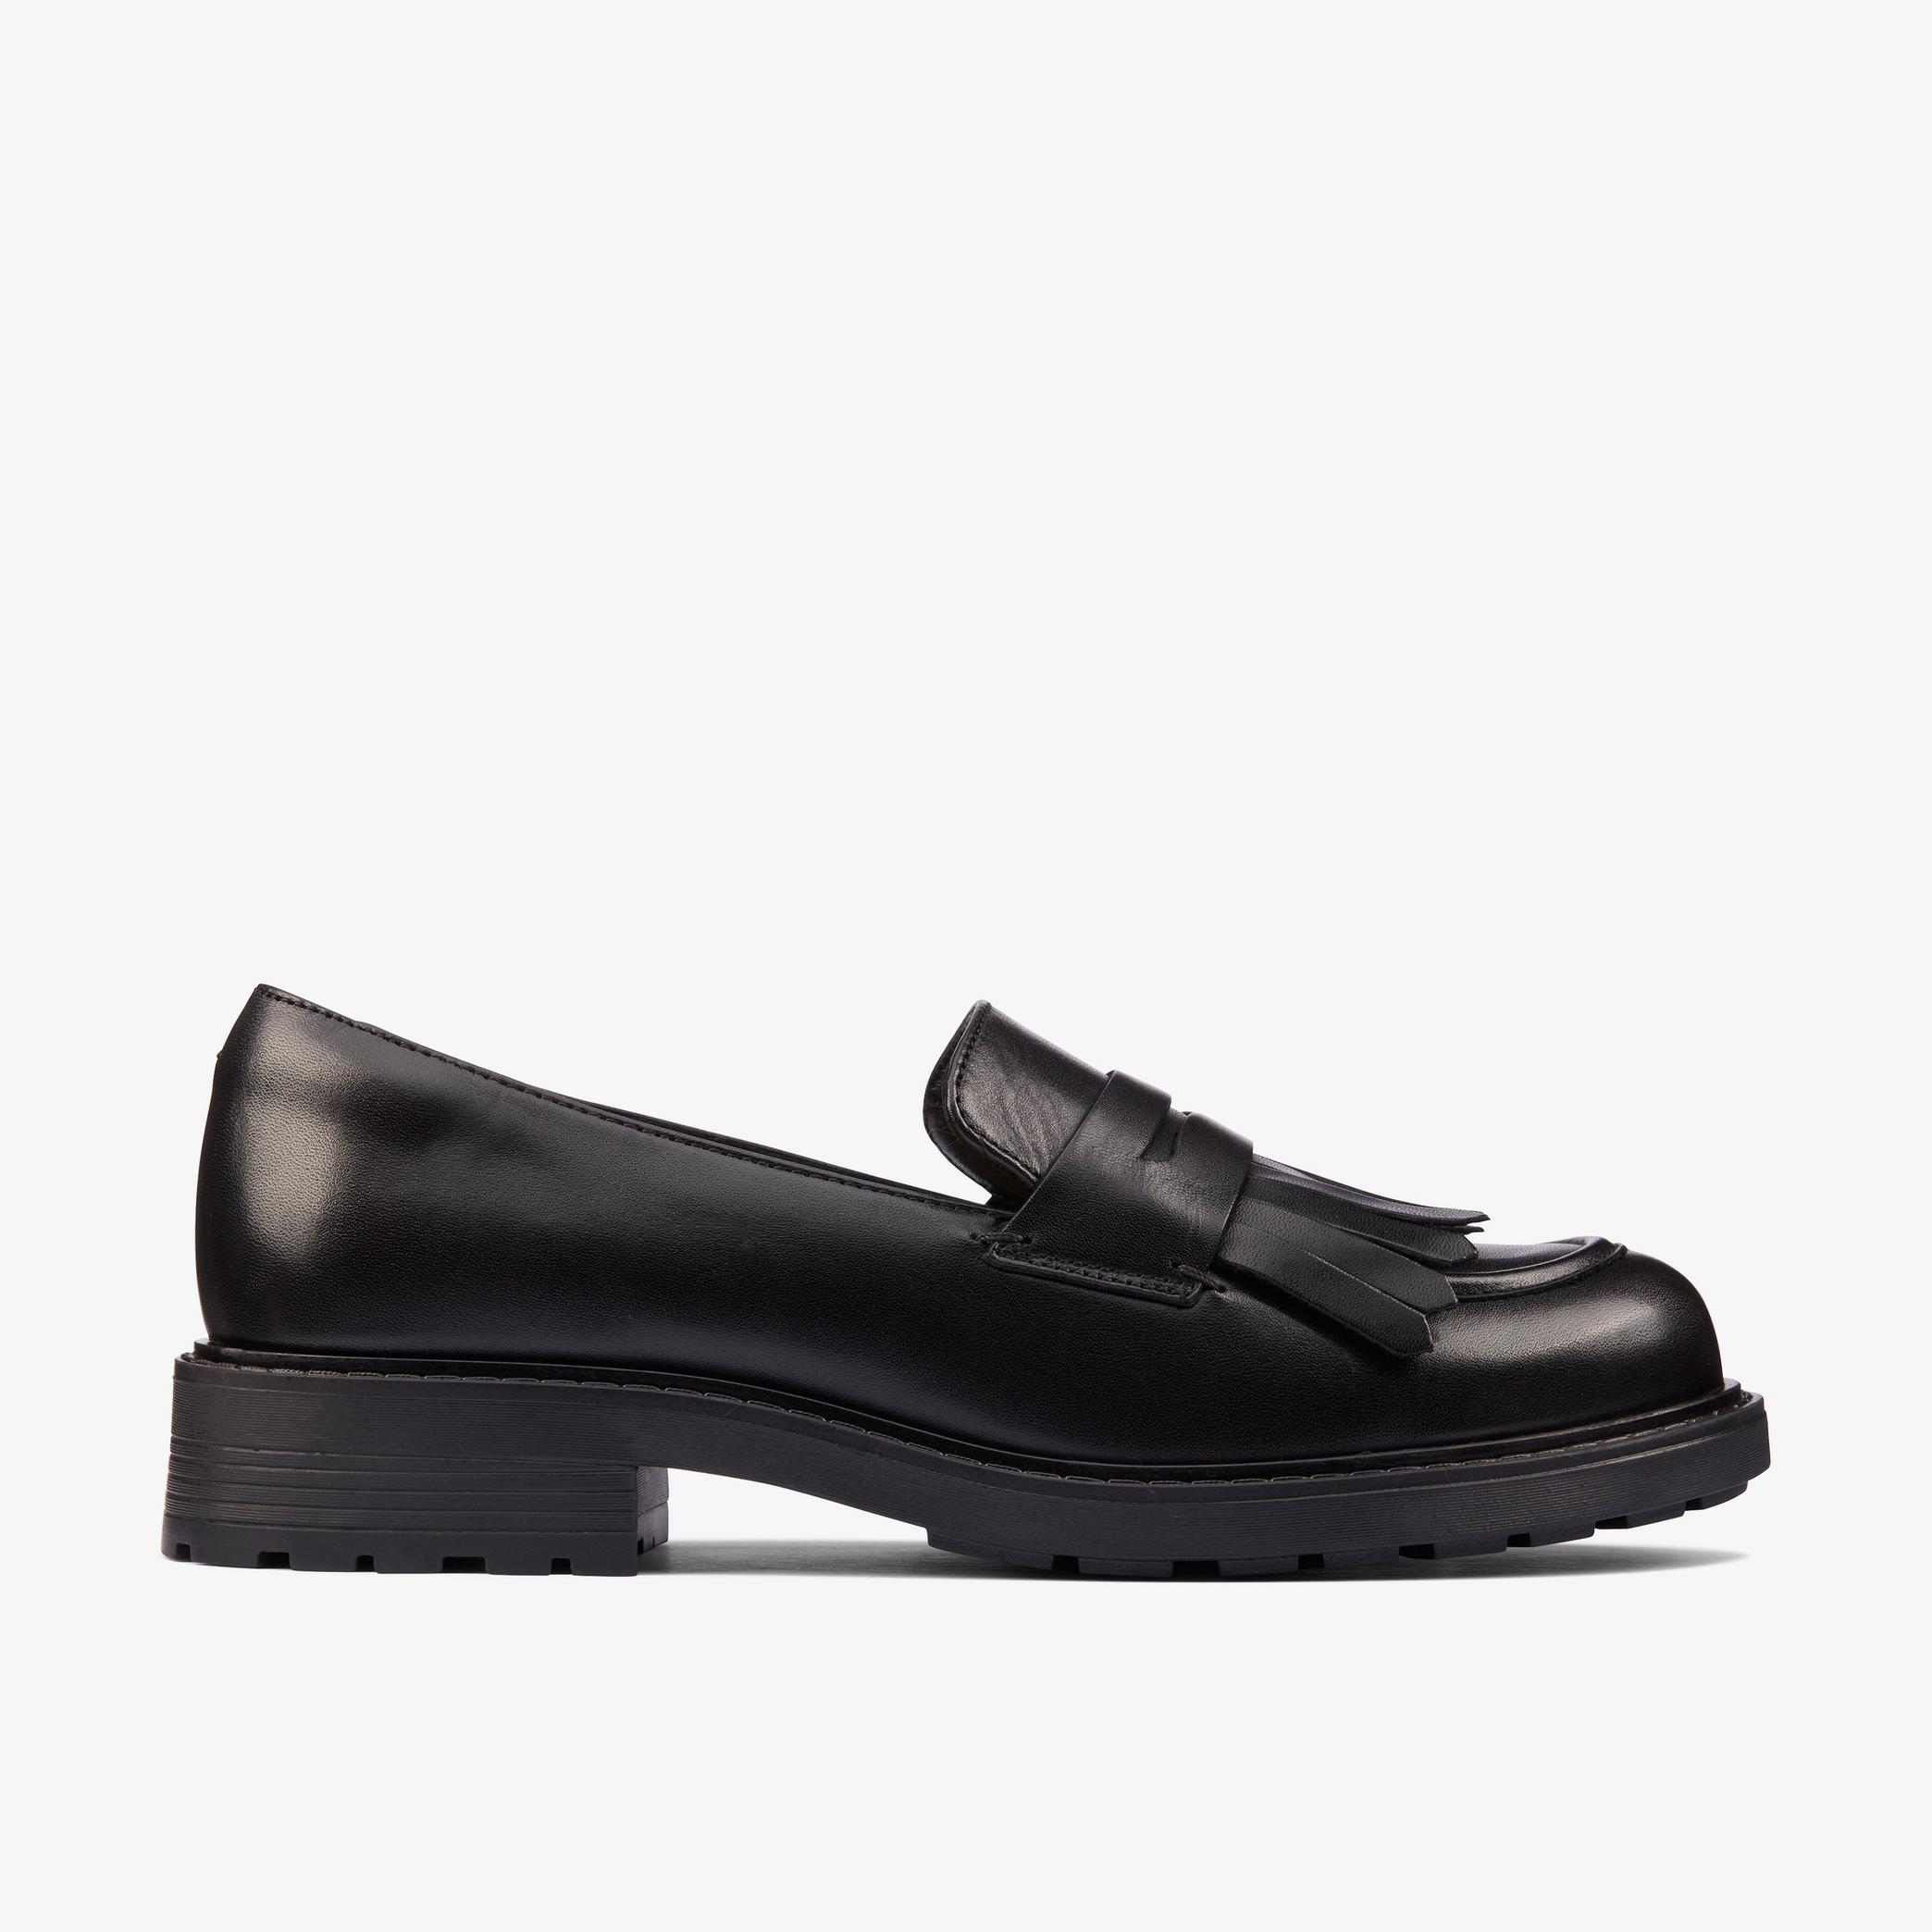 WOMENS Orinoco 2 Loafer Black Hi Shine Leather Loafers | Clarks Outlet